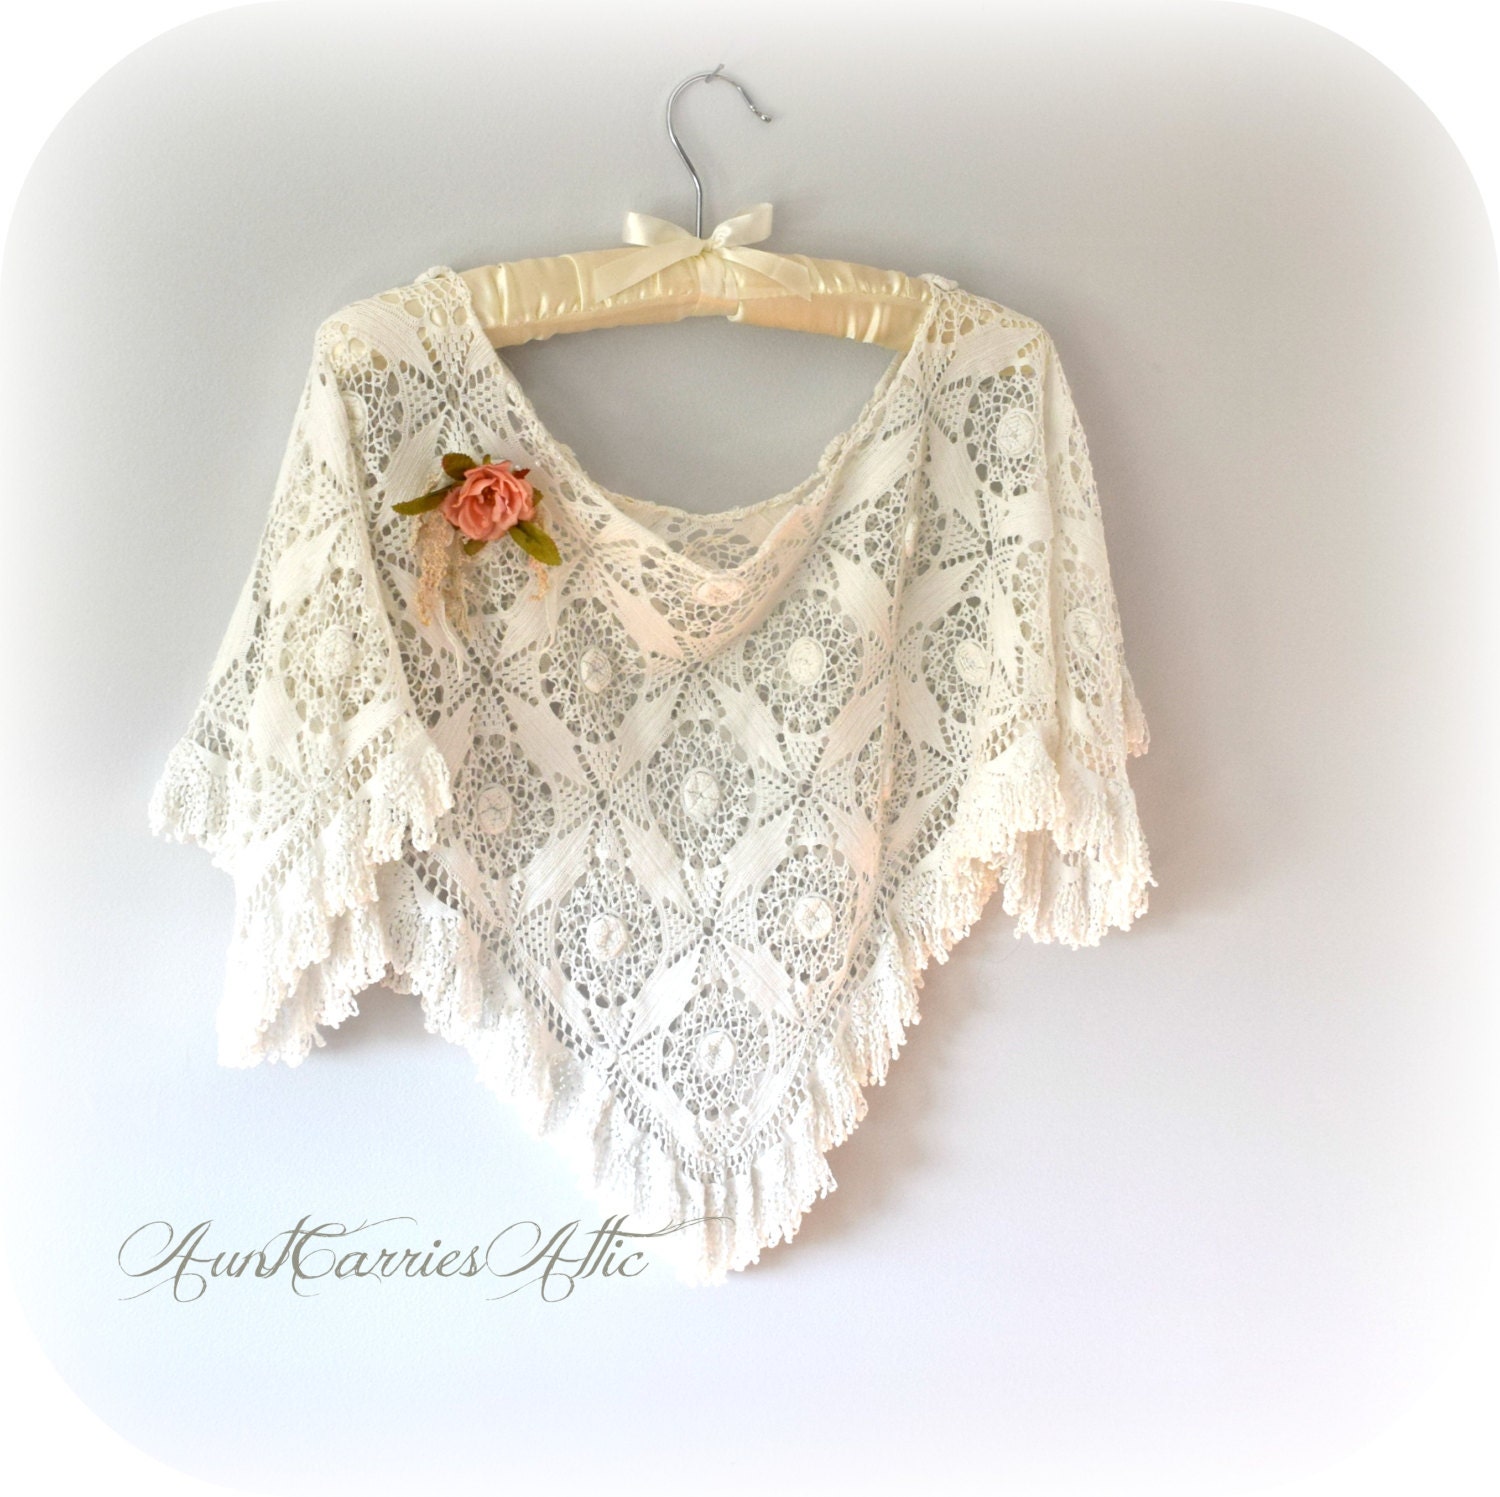 White Bridal Shawl Rustic Chic Very Delicate by auntcarriesattic